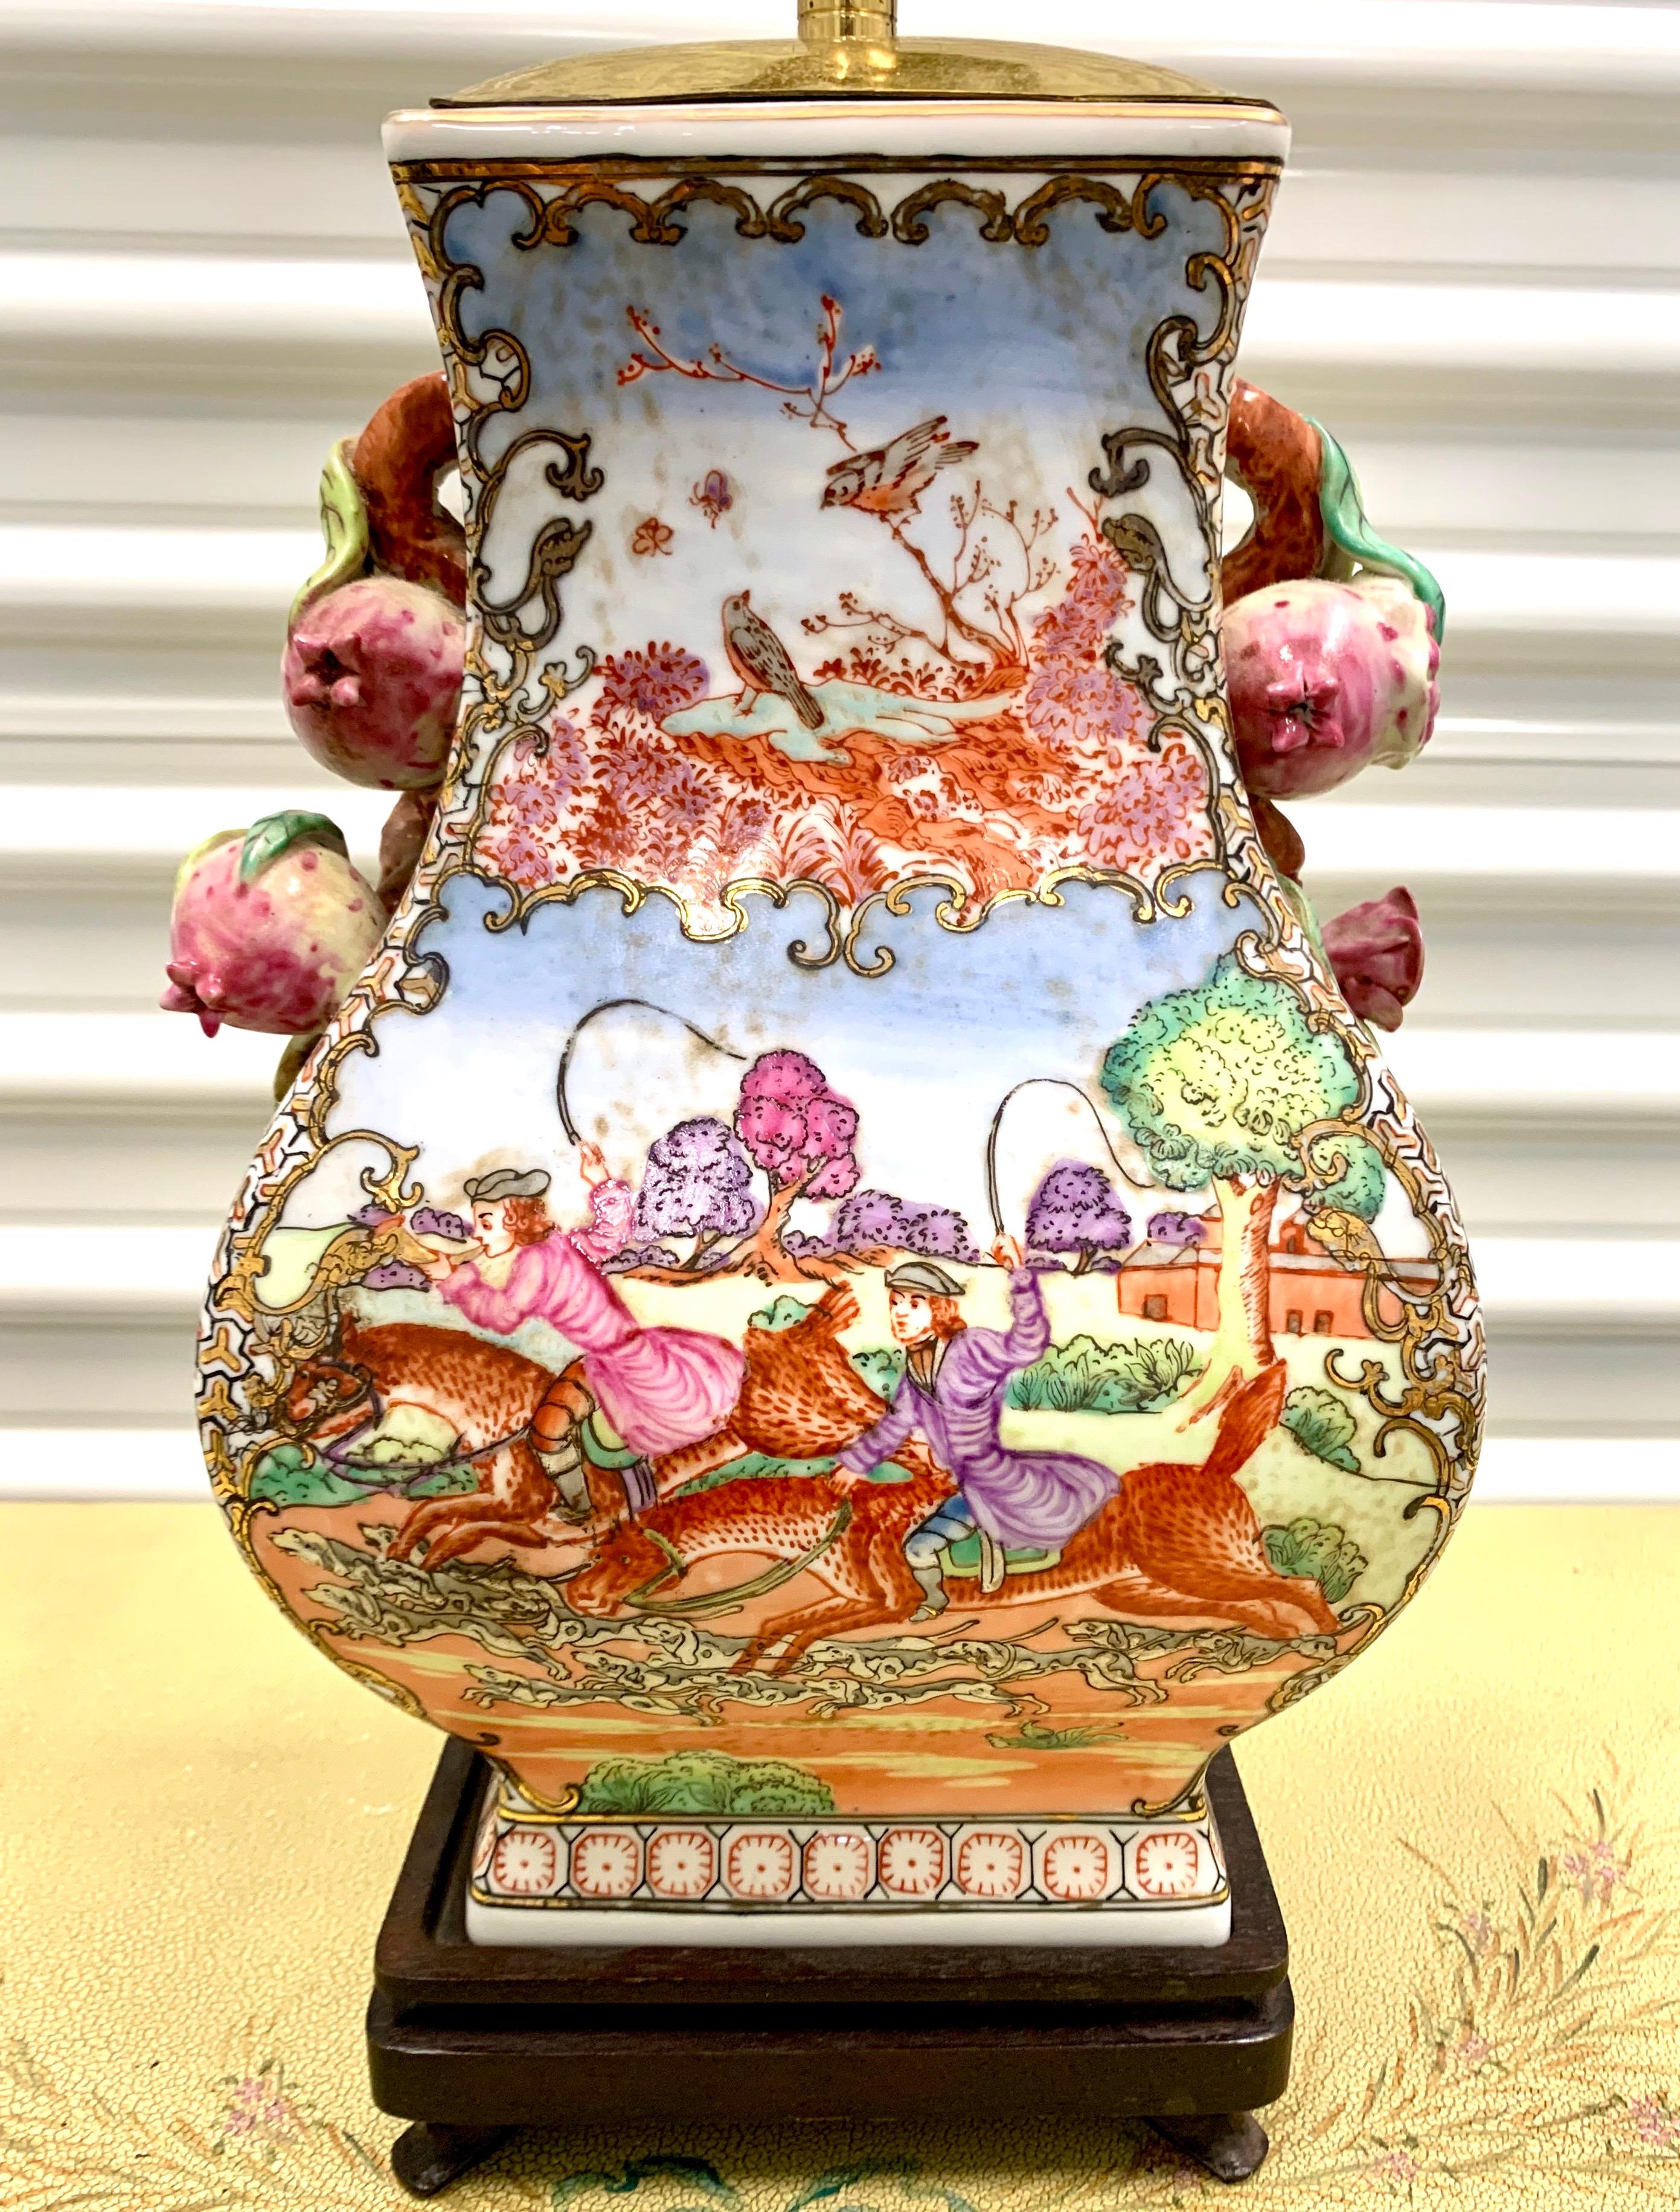 Colorful Chinese export porcelain vase mounted as a lamp with hand painted fox hunt motif. Features raised pomegranate fruit handles with brass hardware and finial. Now electrified and mounted on a wood base. Shade dimensions: 17” W x 12” D x 11.5”